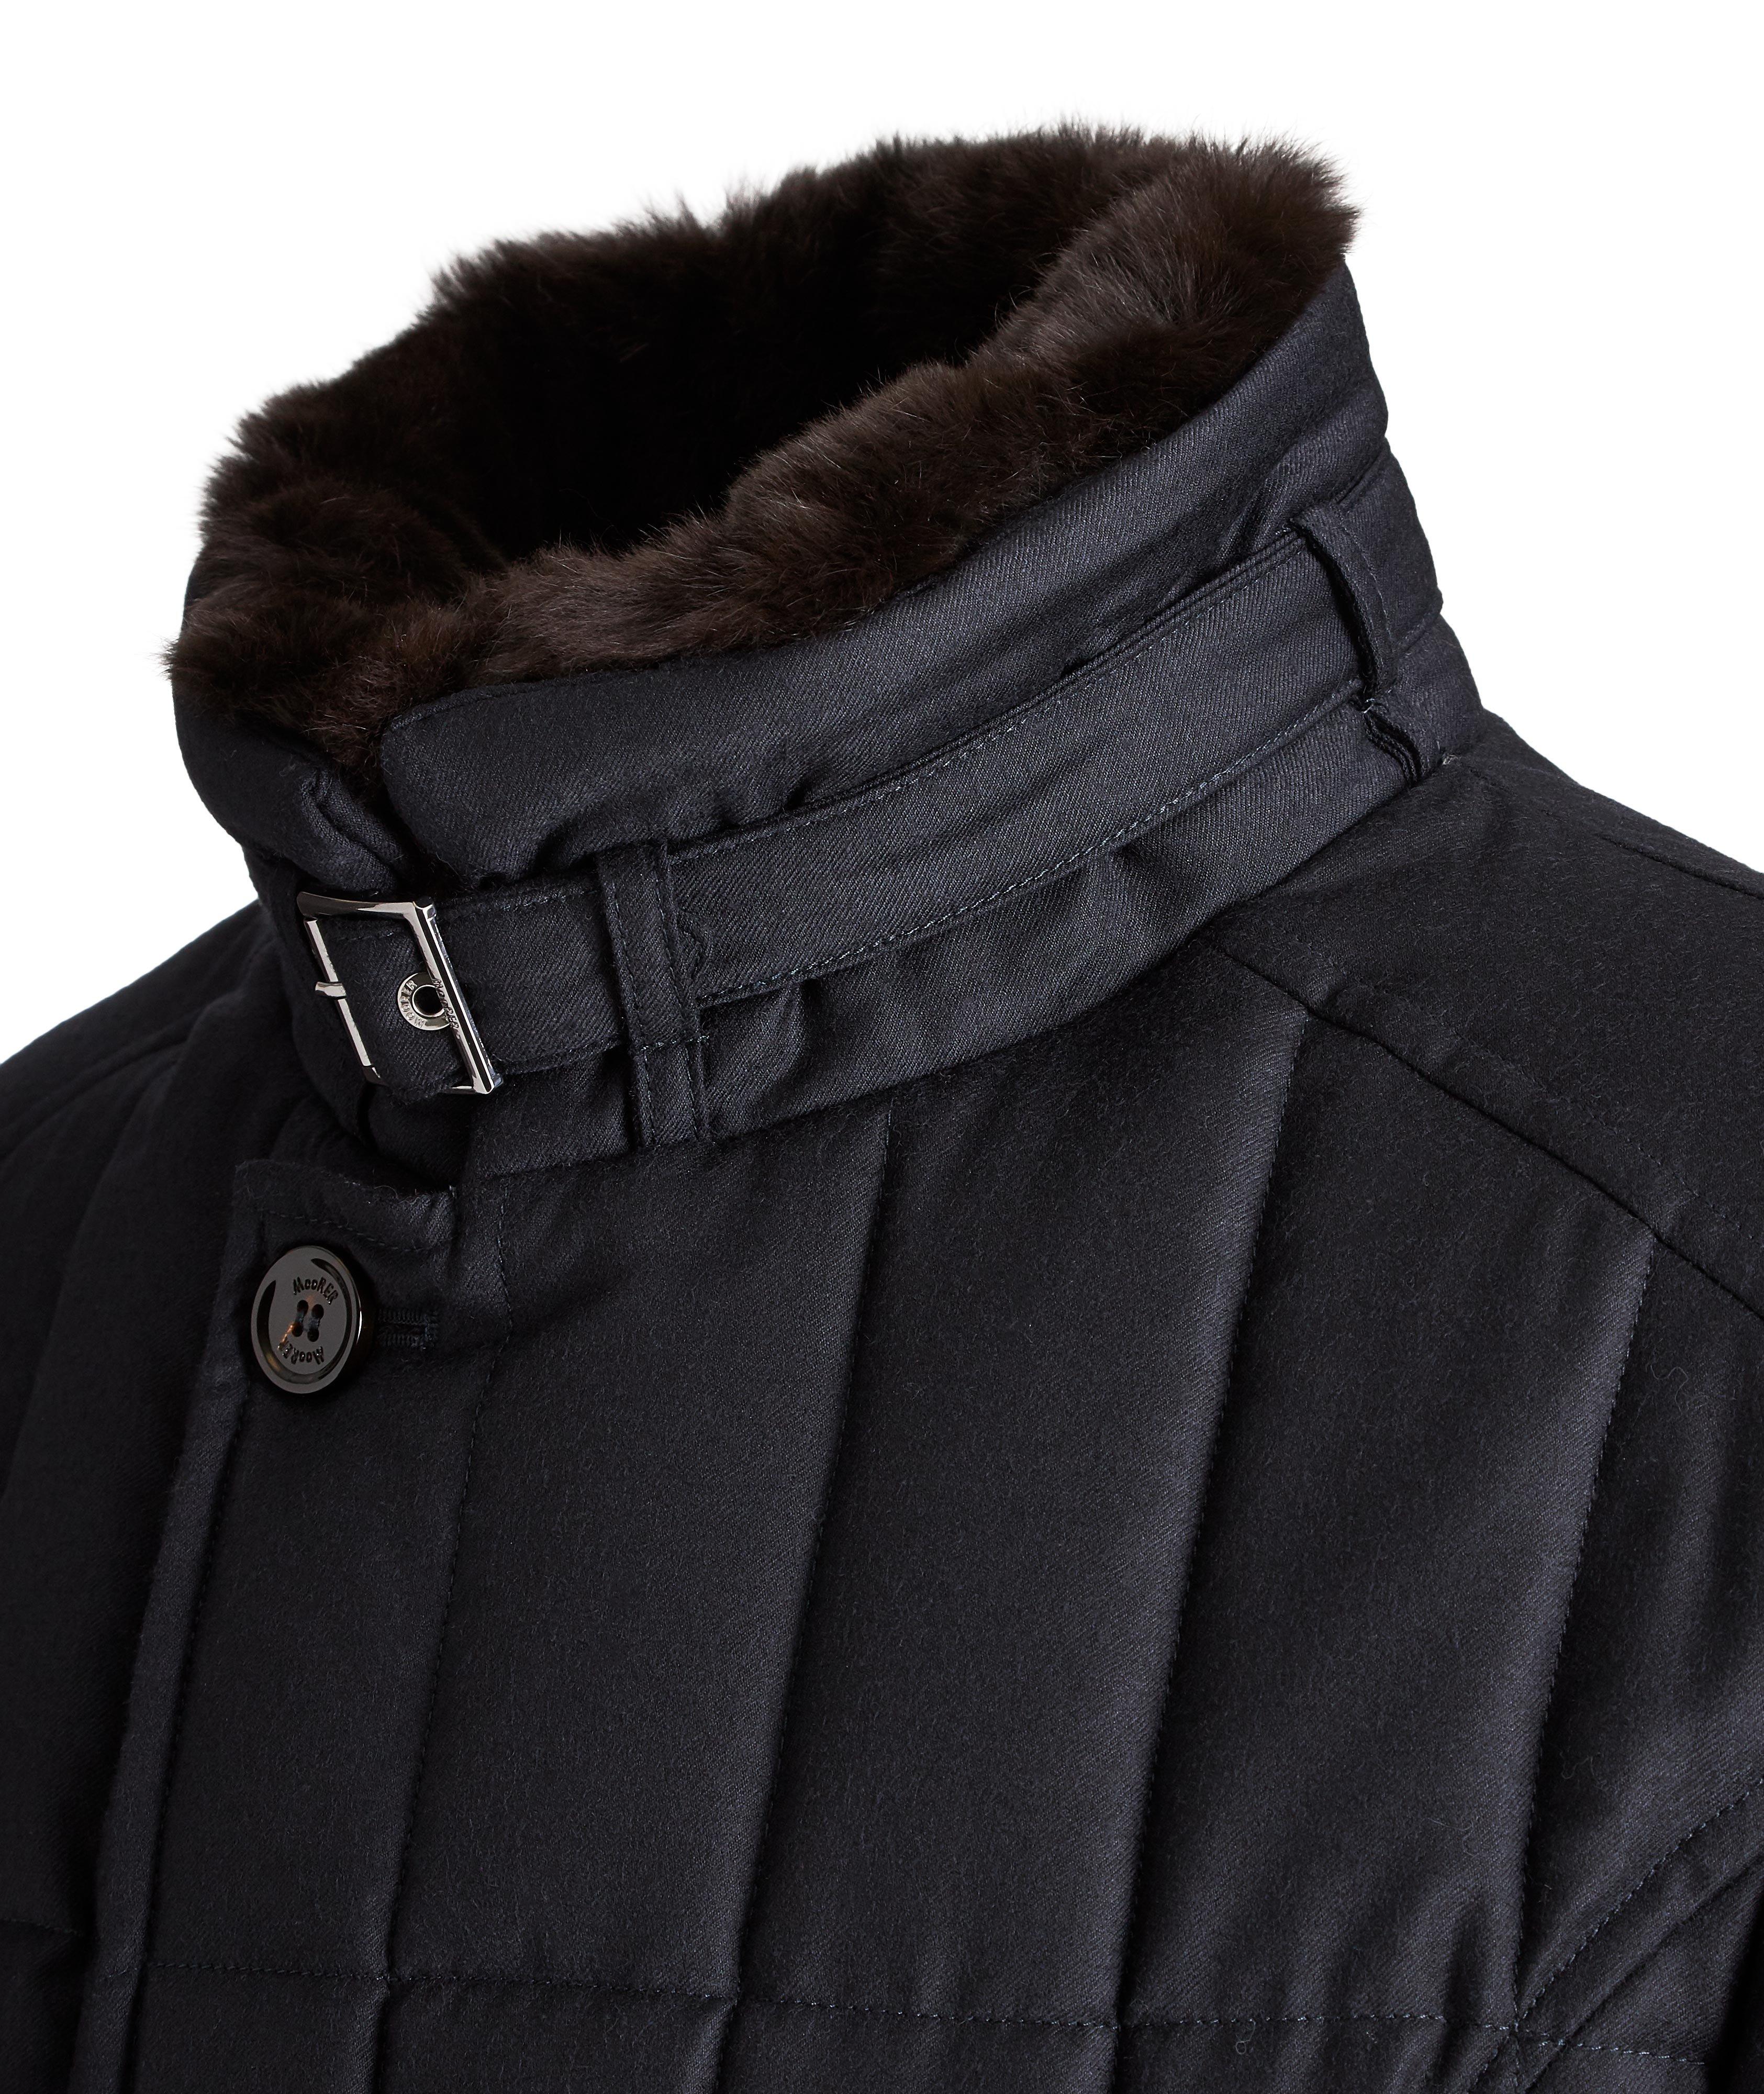 Siro Quilted Wool-Cashmere Jacket image 2